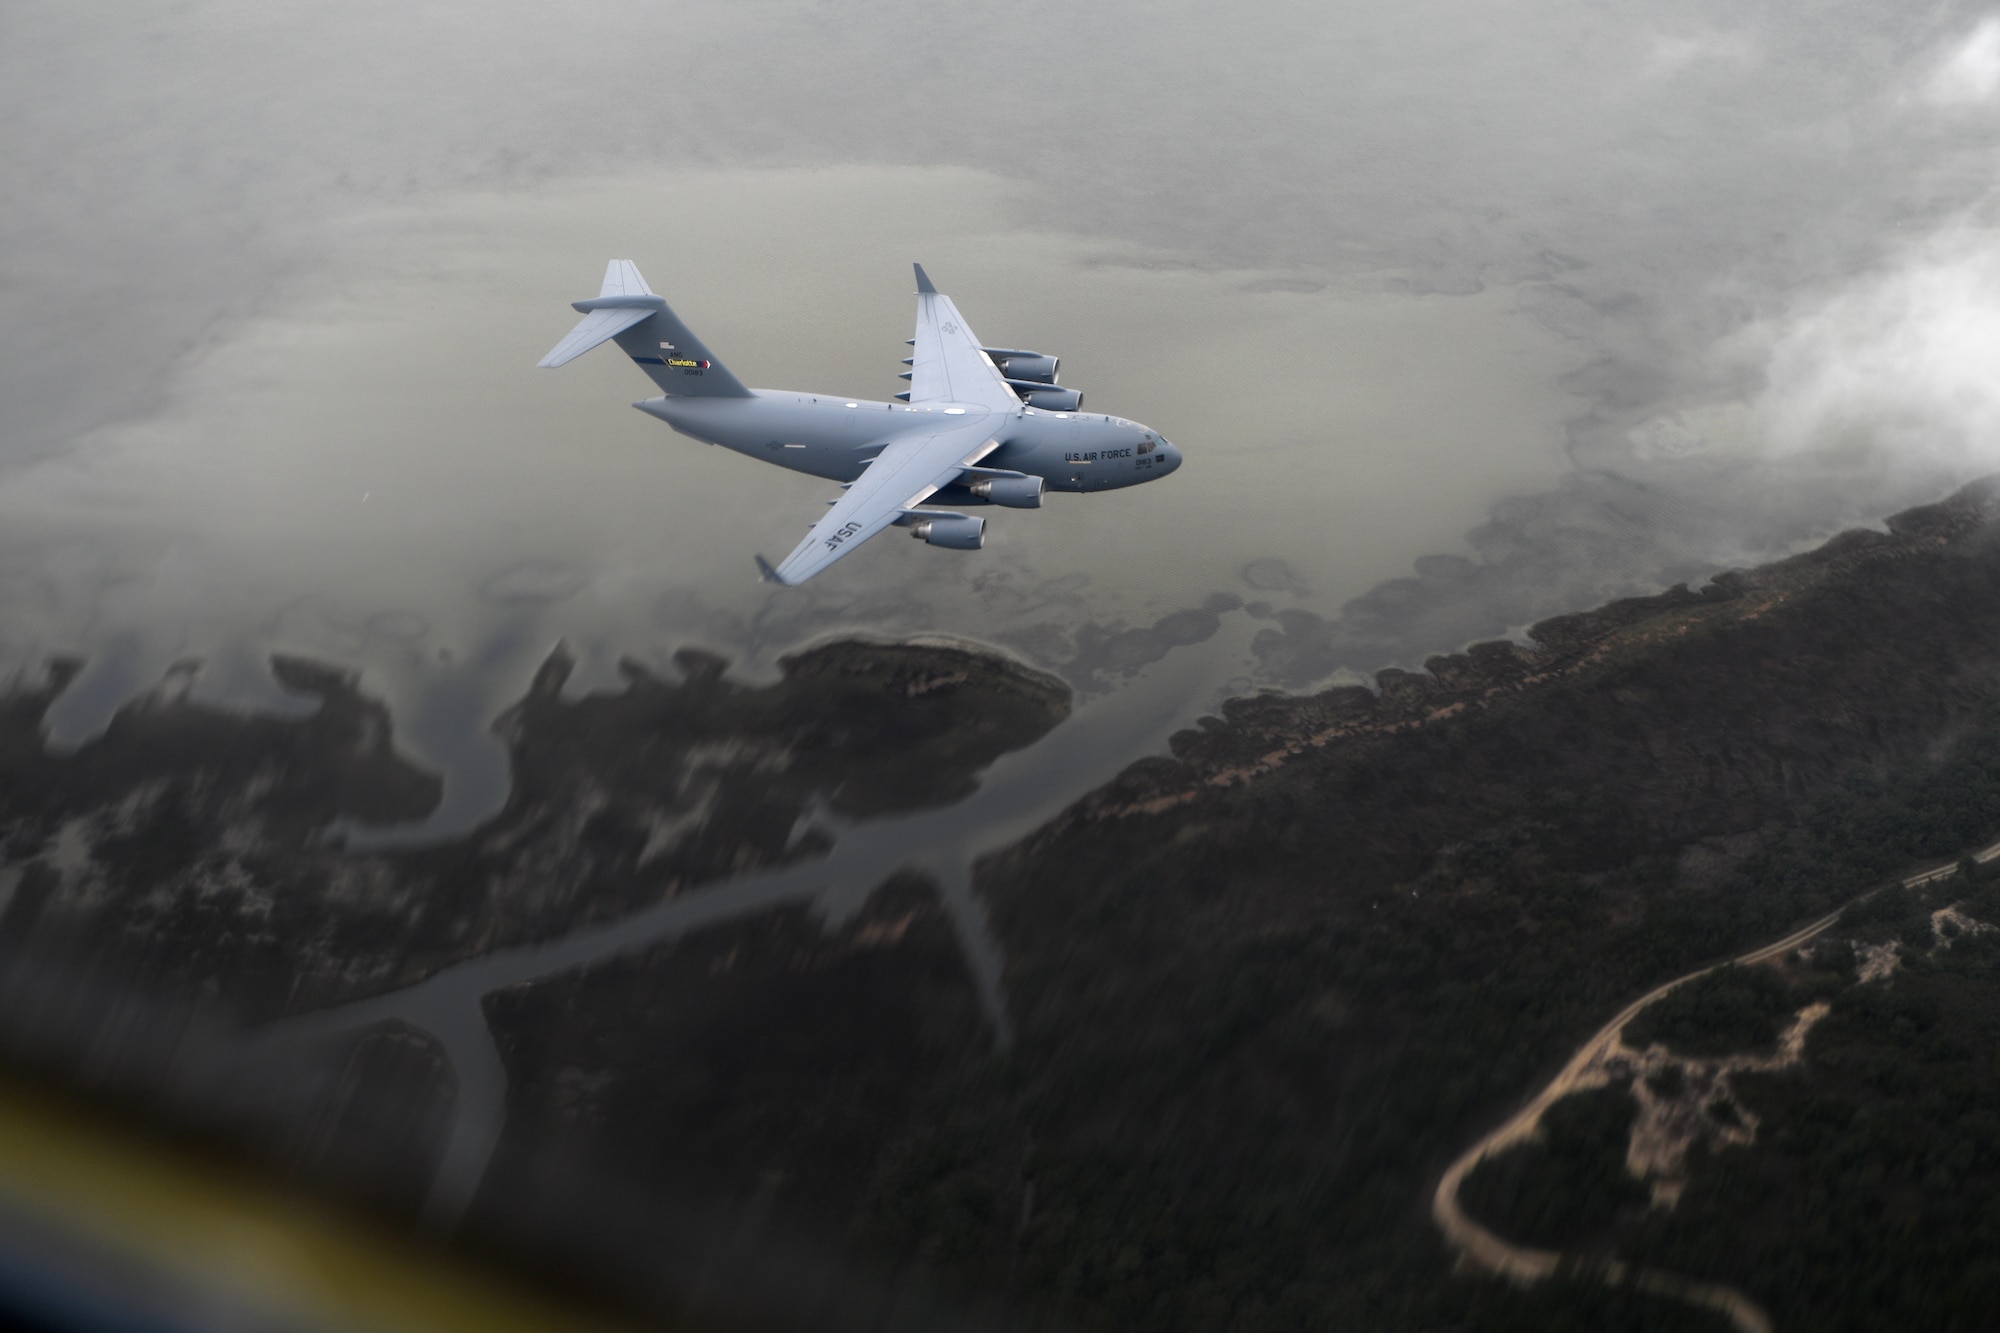 A C-17 Globemaster III aircraft flies over the N.C. coast line on the way to the North Carolina Air National Guard Base, Charlotte Douglas International Airport, April 7, 2018. The airframes homecoming will be marked by an Acceptance Ceremony. The 145th Airlift Wing (AW) was selected to transition from the C-130 Hercules aircraft to the C-17 Globemaster III aircraft 18 months ago, and the airframe will carry the units airlift mission into the future. The first two aircraft of eight to come to the 145th AW were previously assigned to the active duty wings at Joint Base Charleston, S.C. or Joint Base Lewis-McChord, Wash.